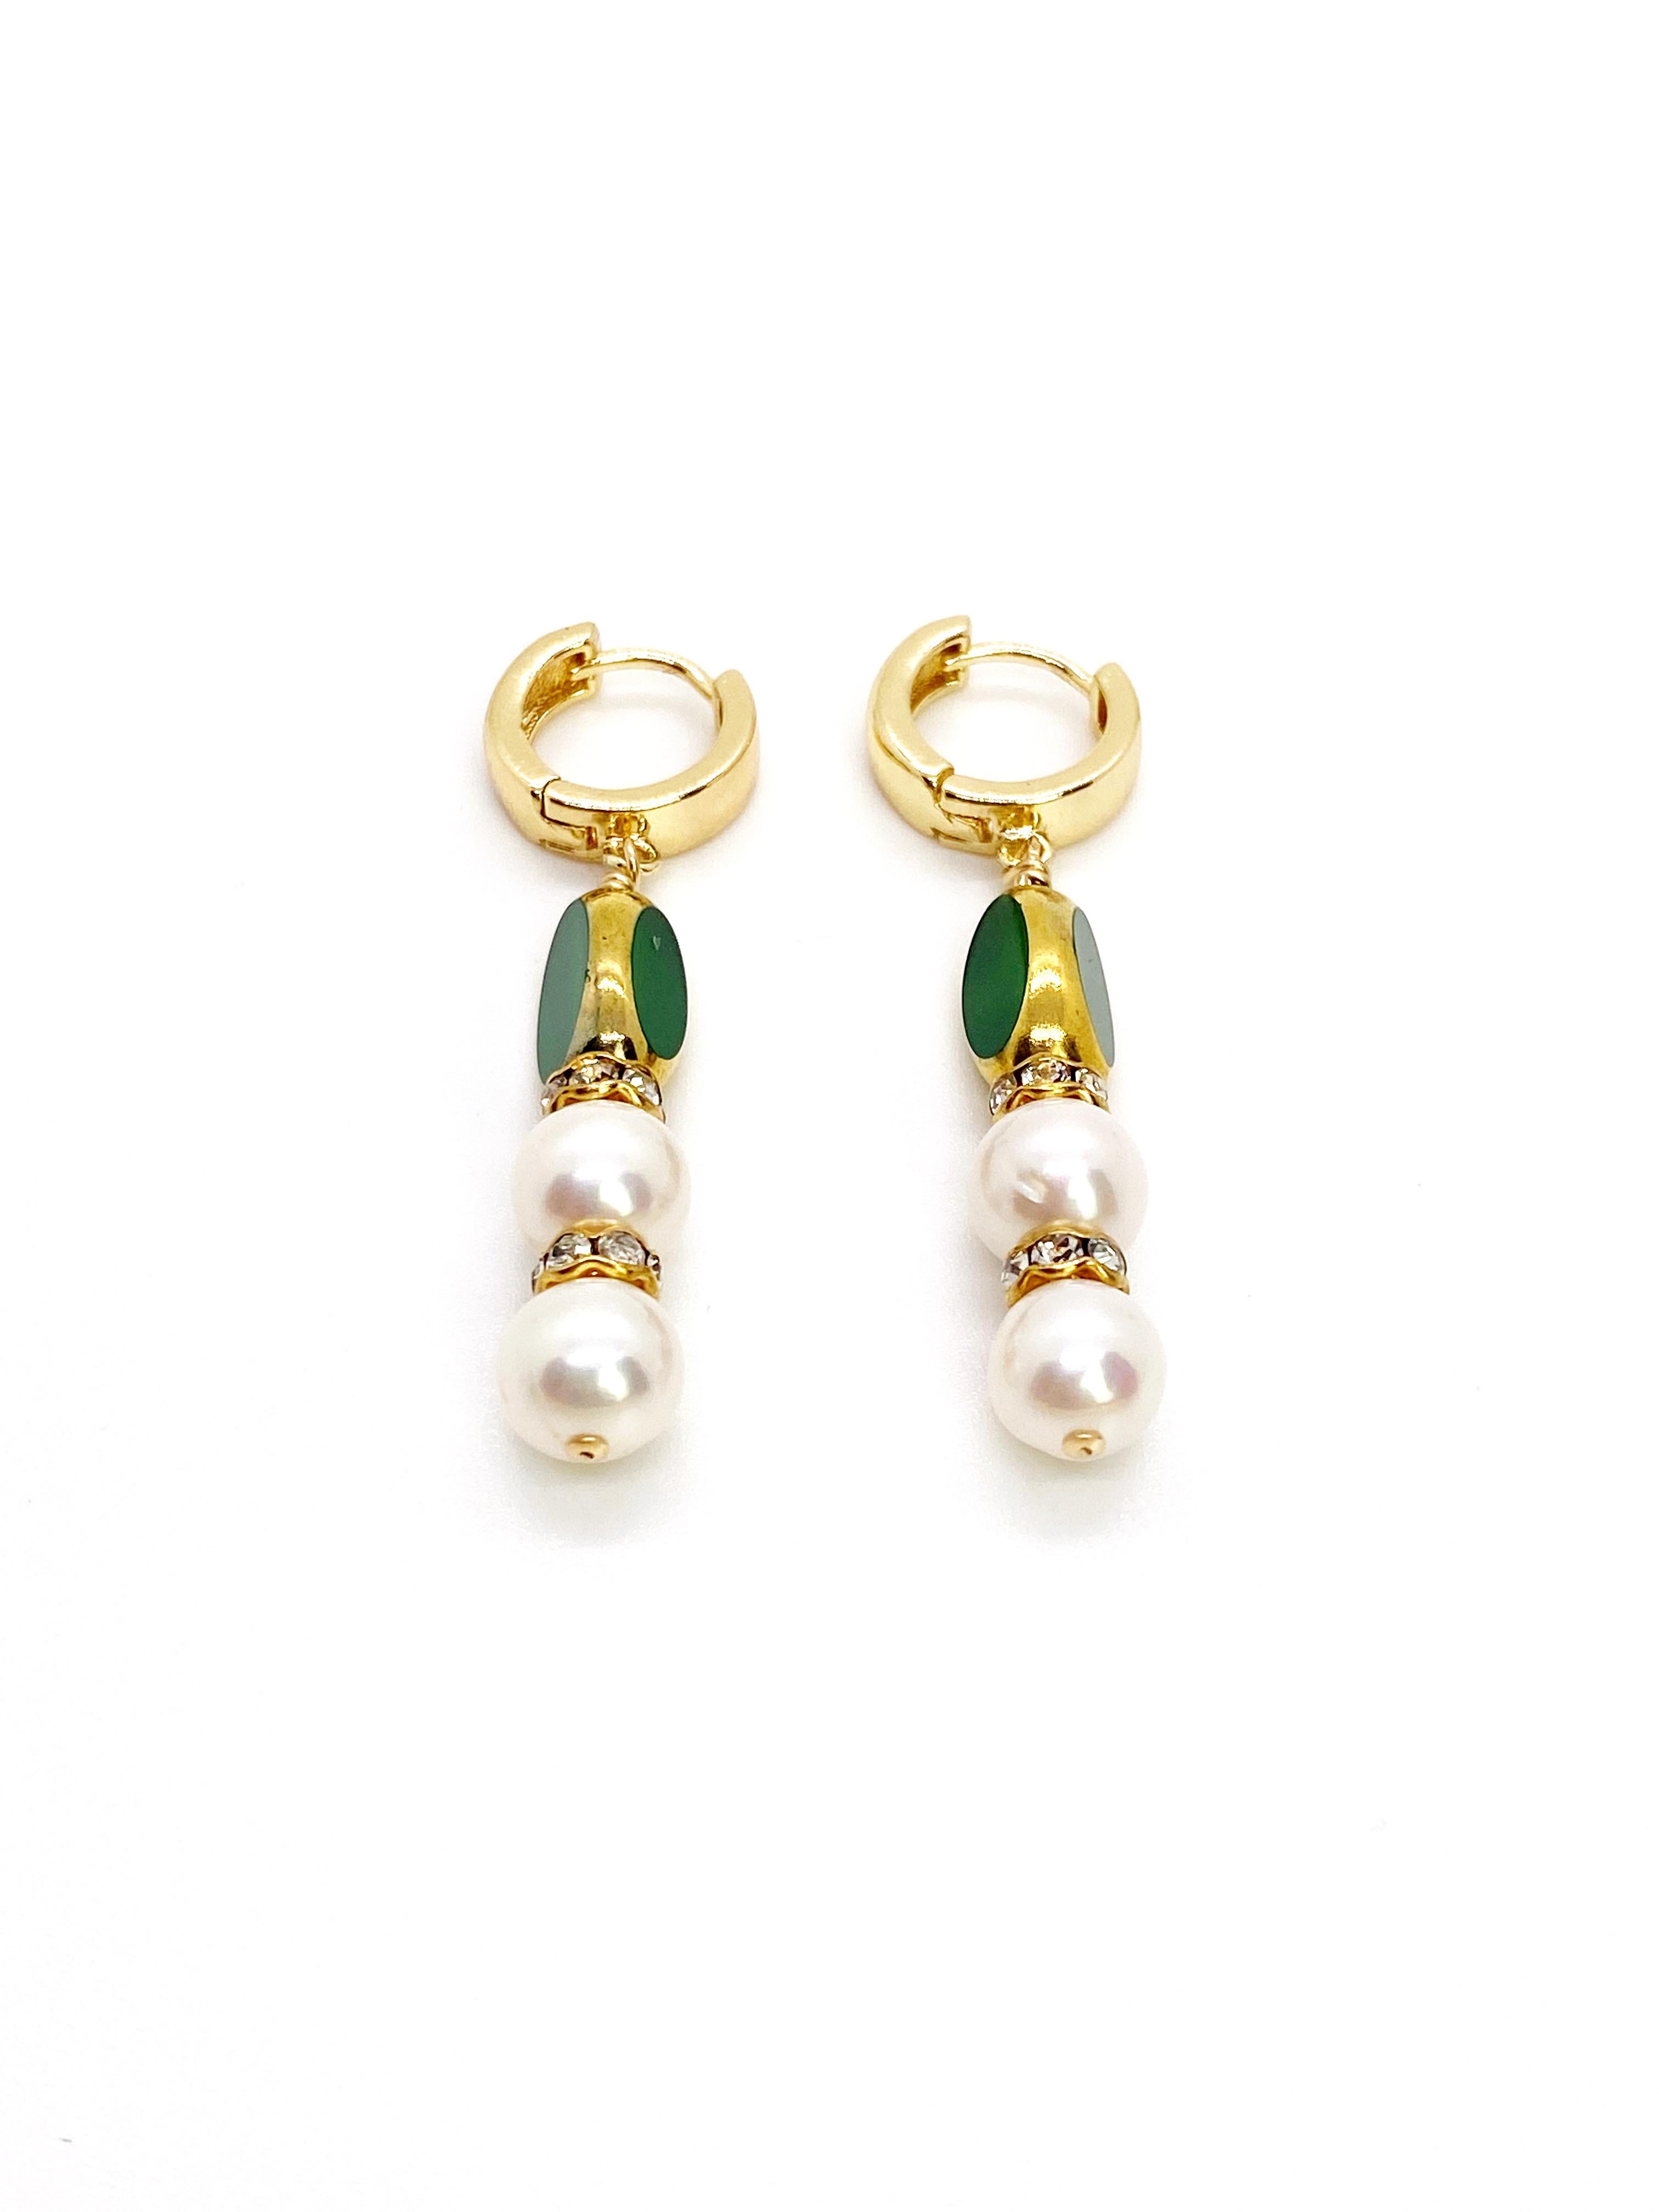 Matte green vintage German glass beads edged with 24K gold with freshwater pearls accented with gold plated rhinestone on a 14K gold filled metals ear findings.

The vintage German bead is considered rare and collectible, circa 1920s-1960s. 

*Our